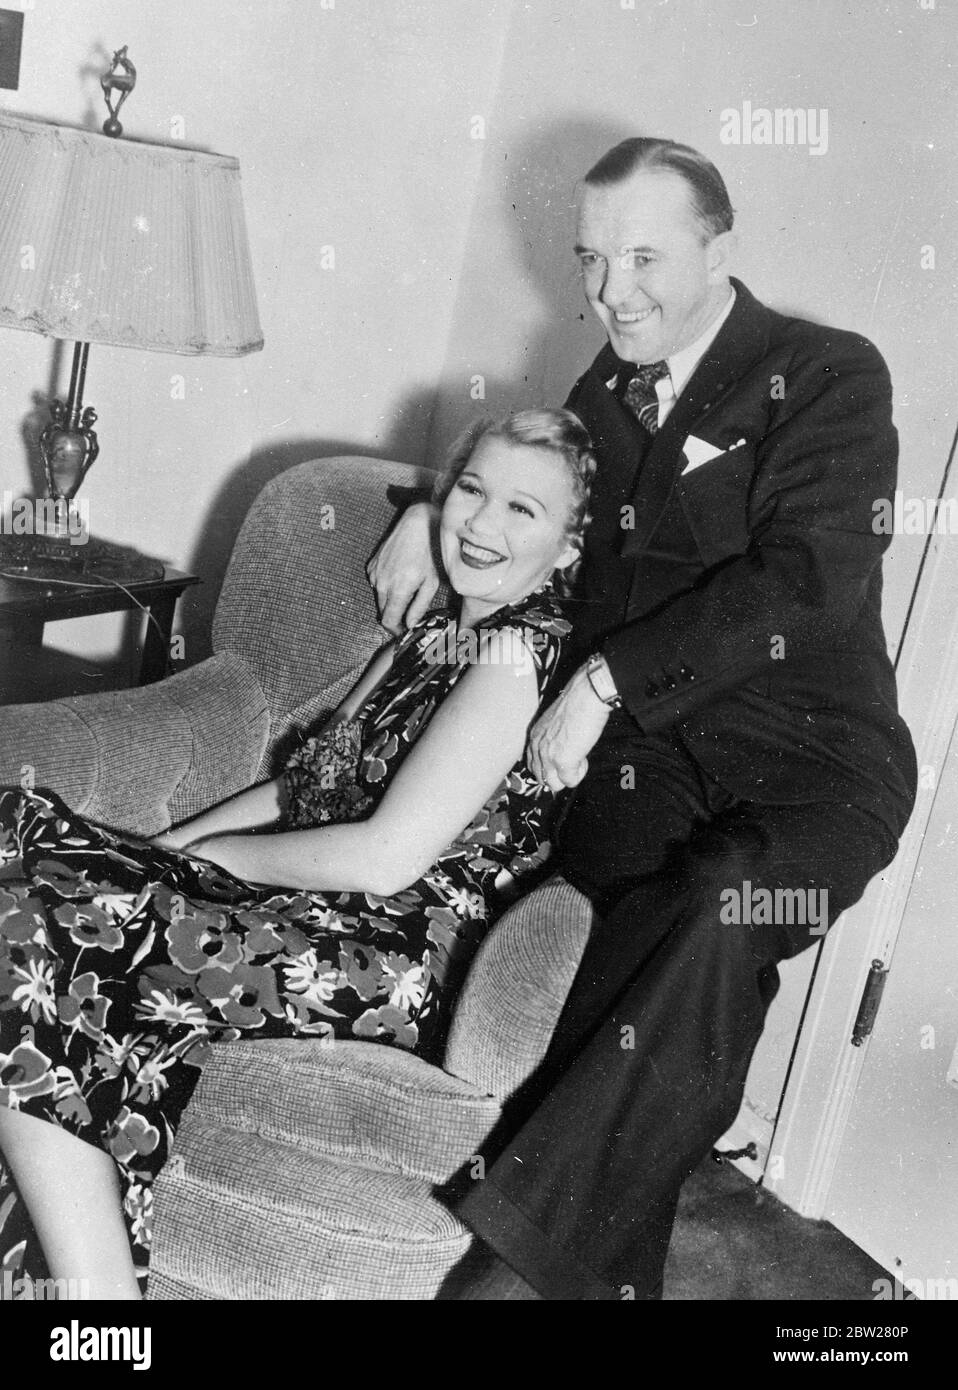 Stan Laurel and his fifth wife. Married despite protests of fourth Mrs Laurel. Stan Laurel, member of the Laurel and Hardy film comedy team, photographed with his wife, formerly known as Illiana, after they had been married in Yuma, Arizona. The ceremony took place despite the protest of Laurel's fourth wife, who claimed that she was still married to the comedian. 19 January 1938 Stock Photo